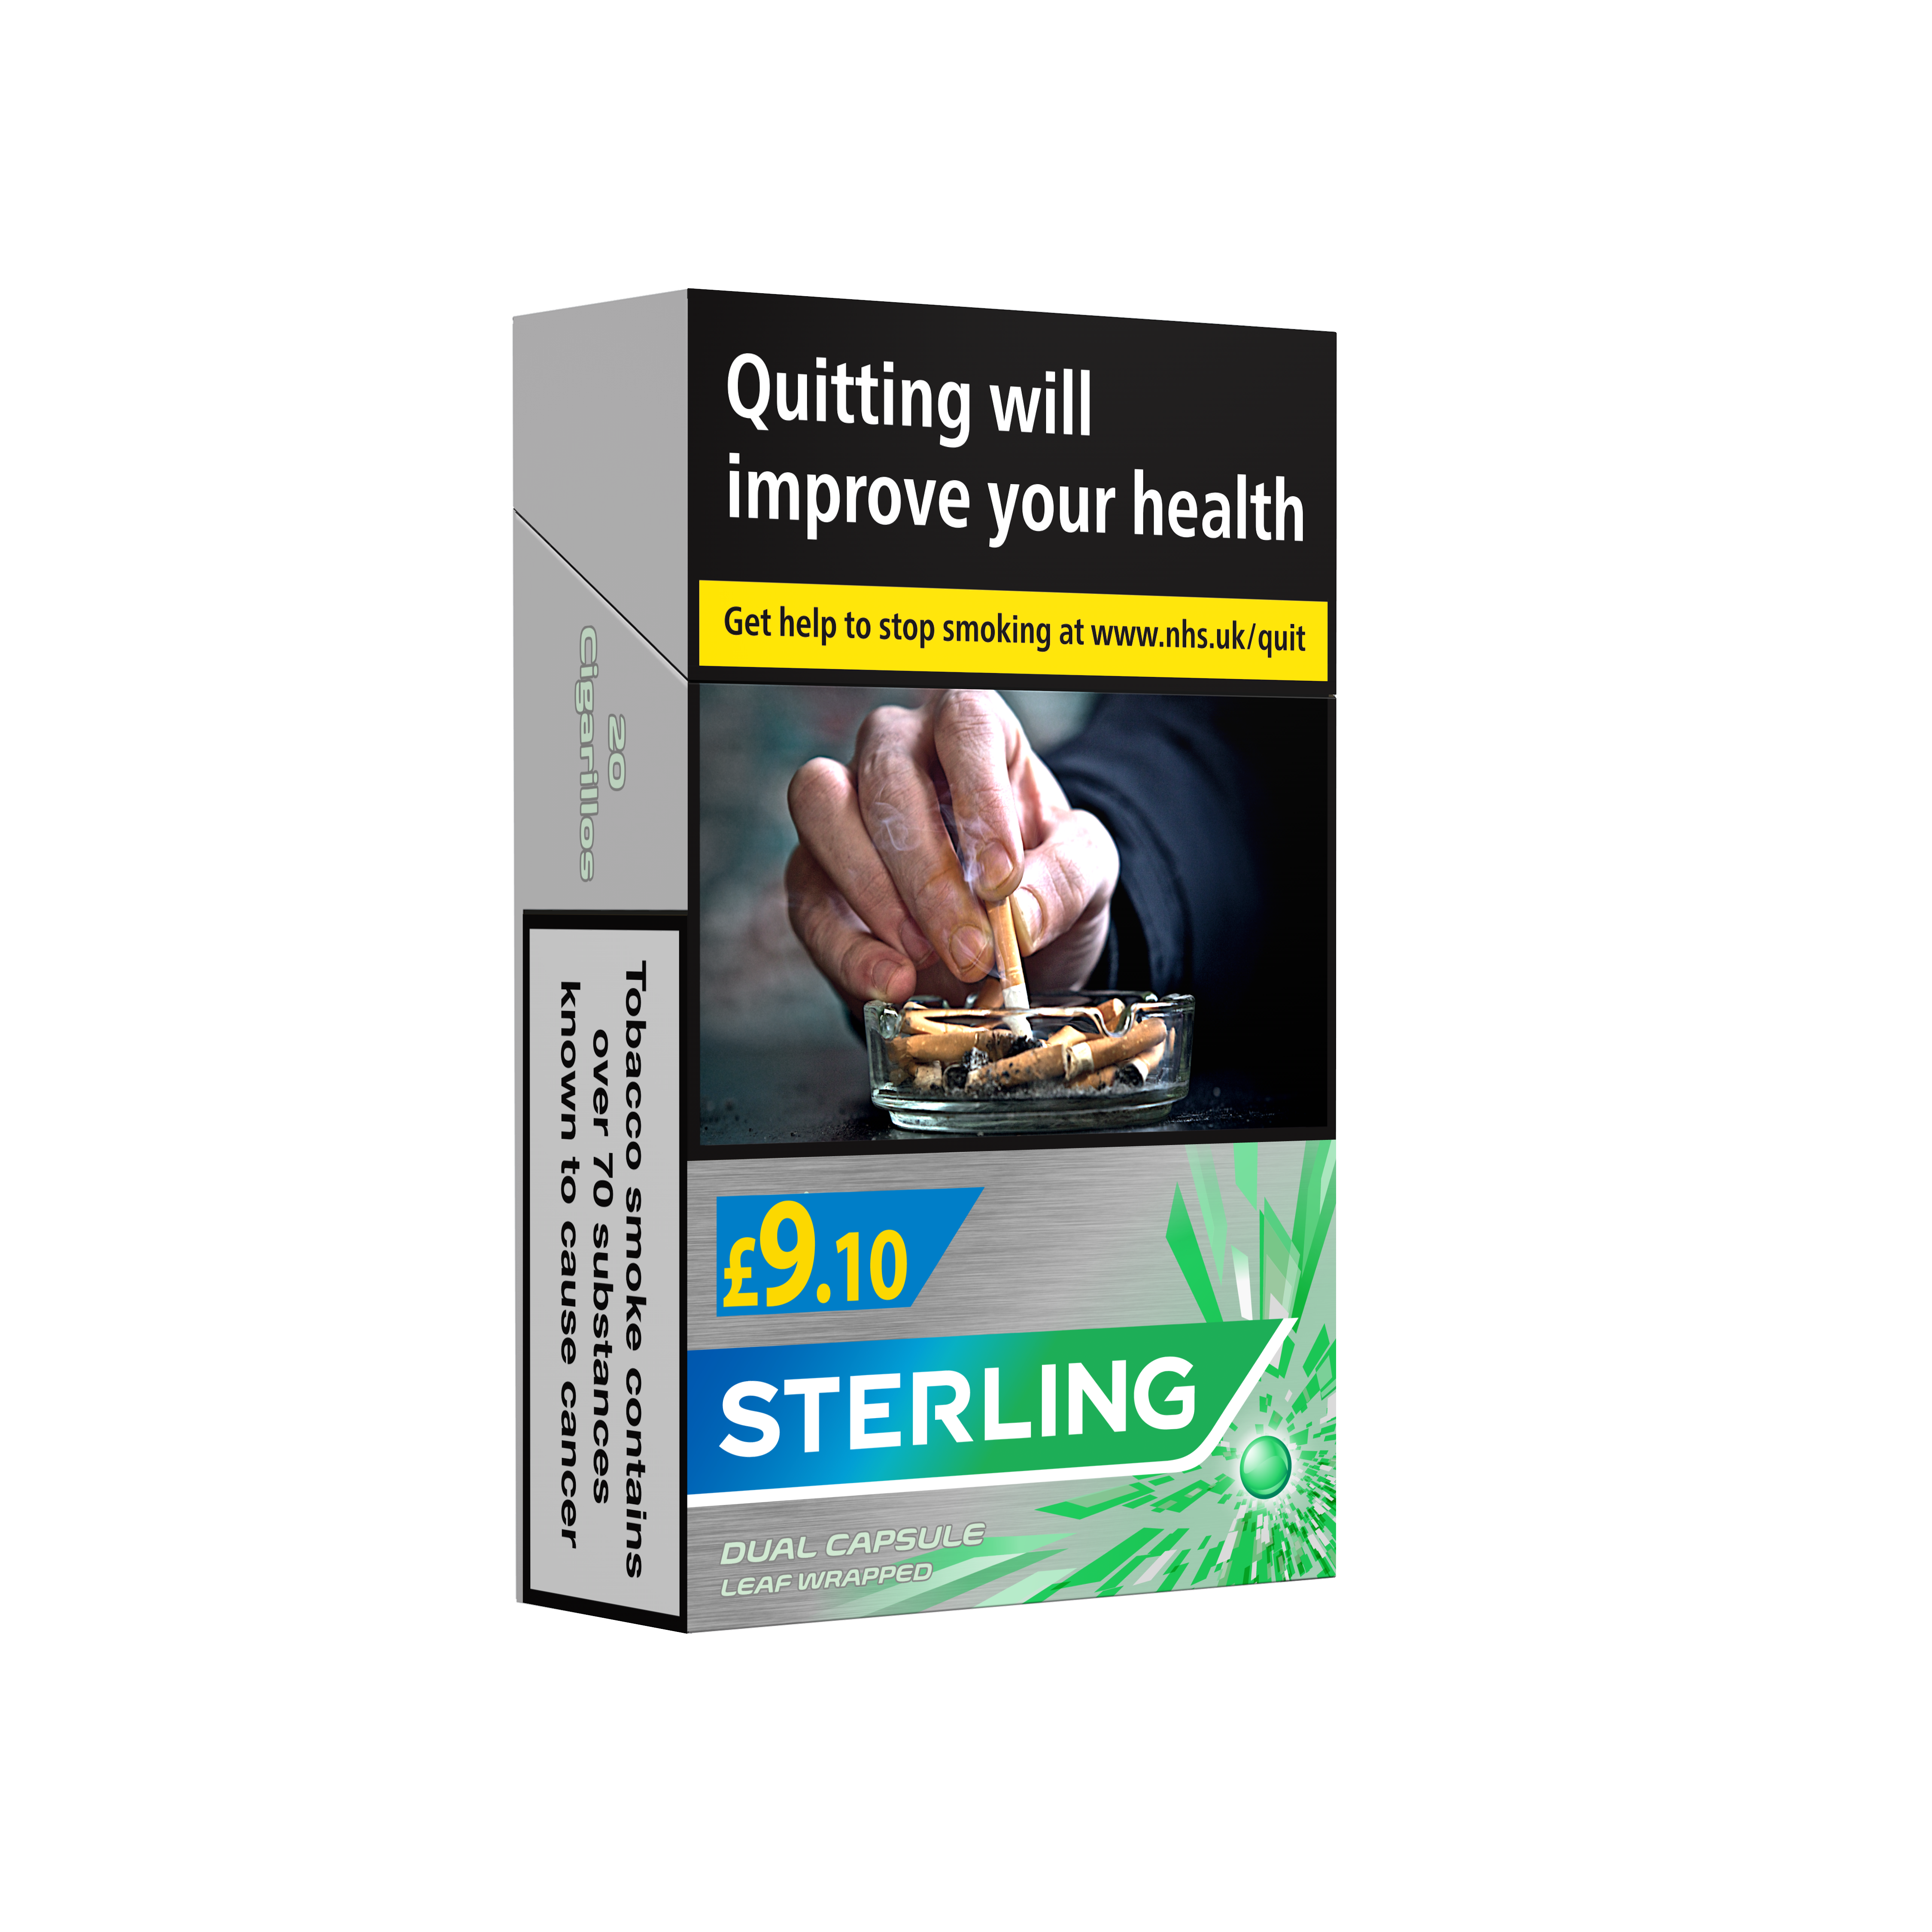 JTI launches Sterling Dual Capsule Leaf Wrapped 20s